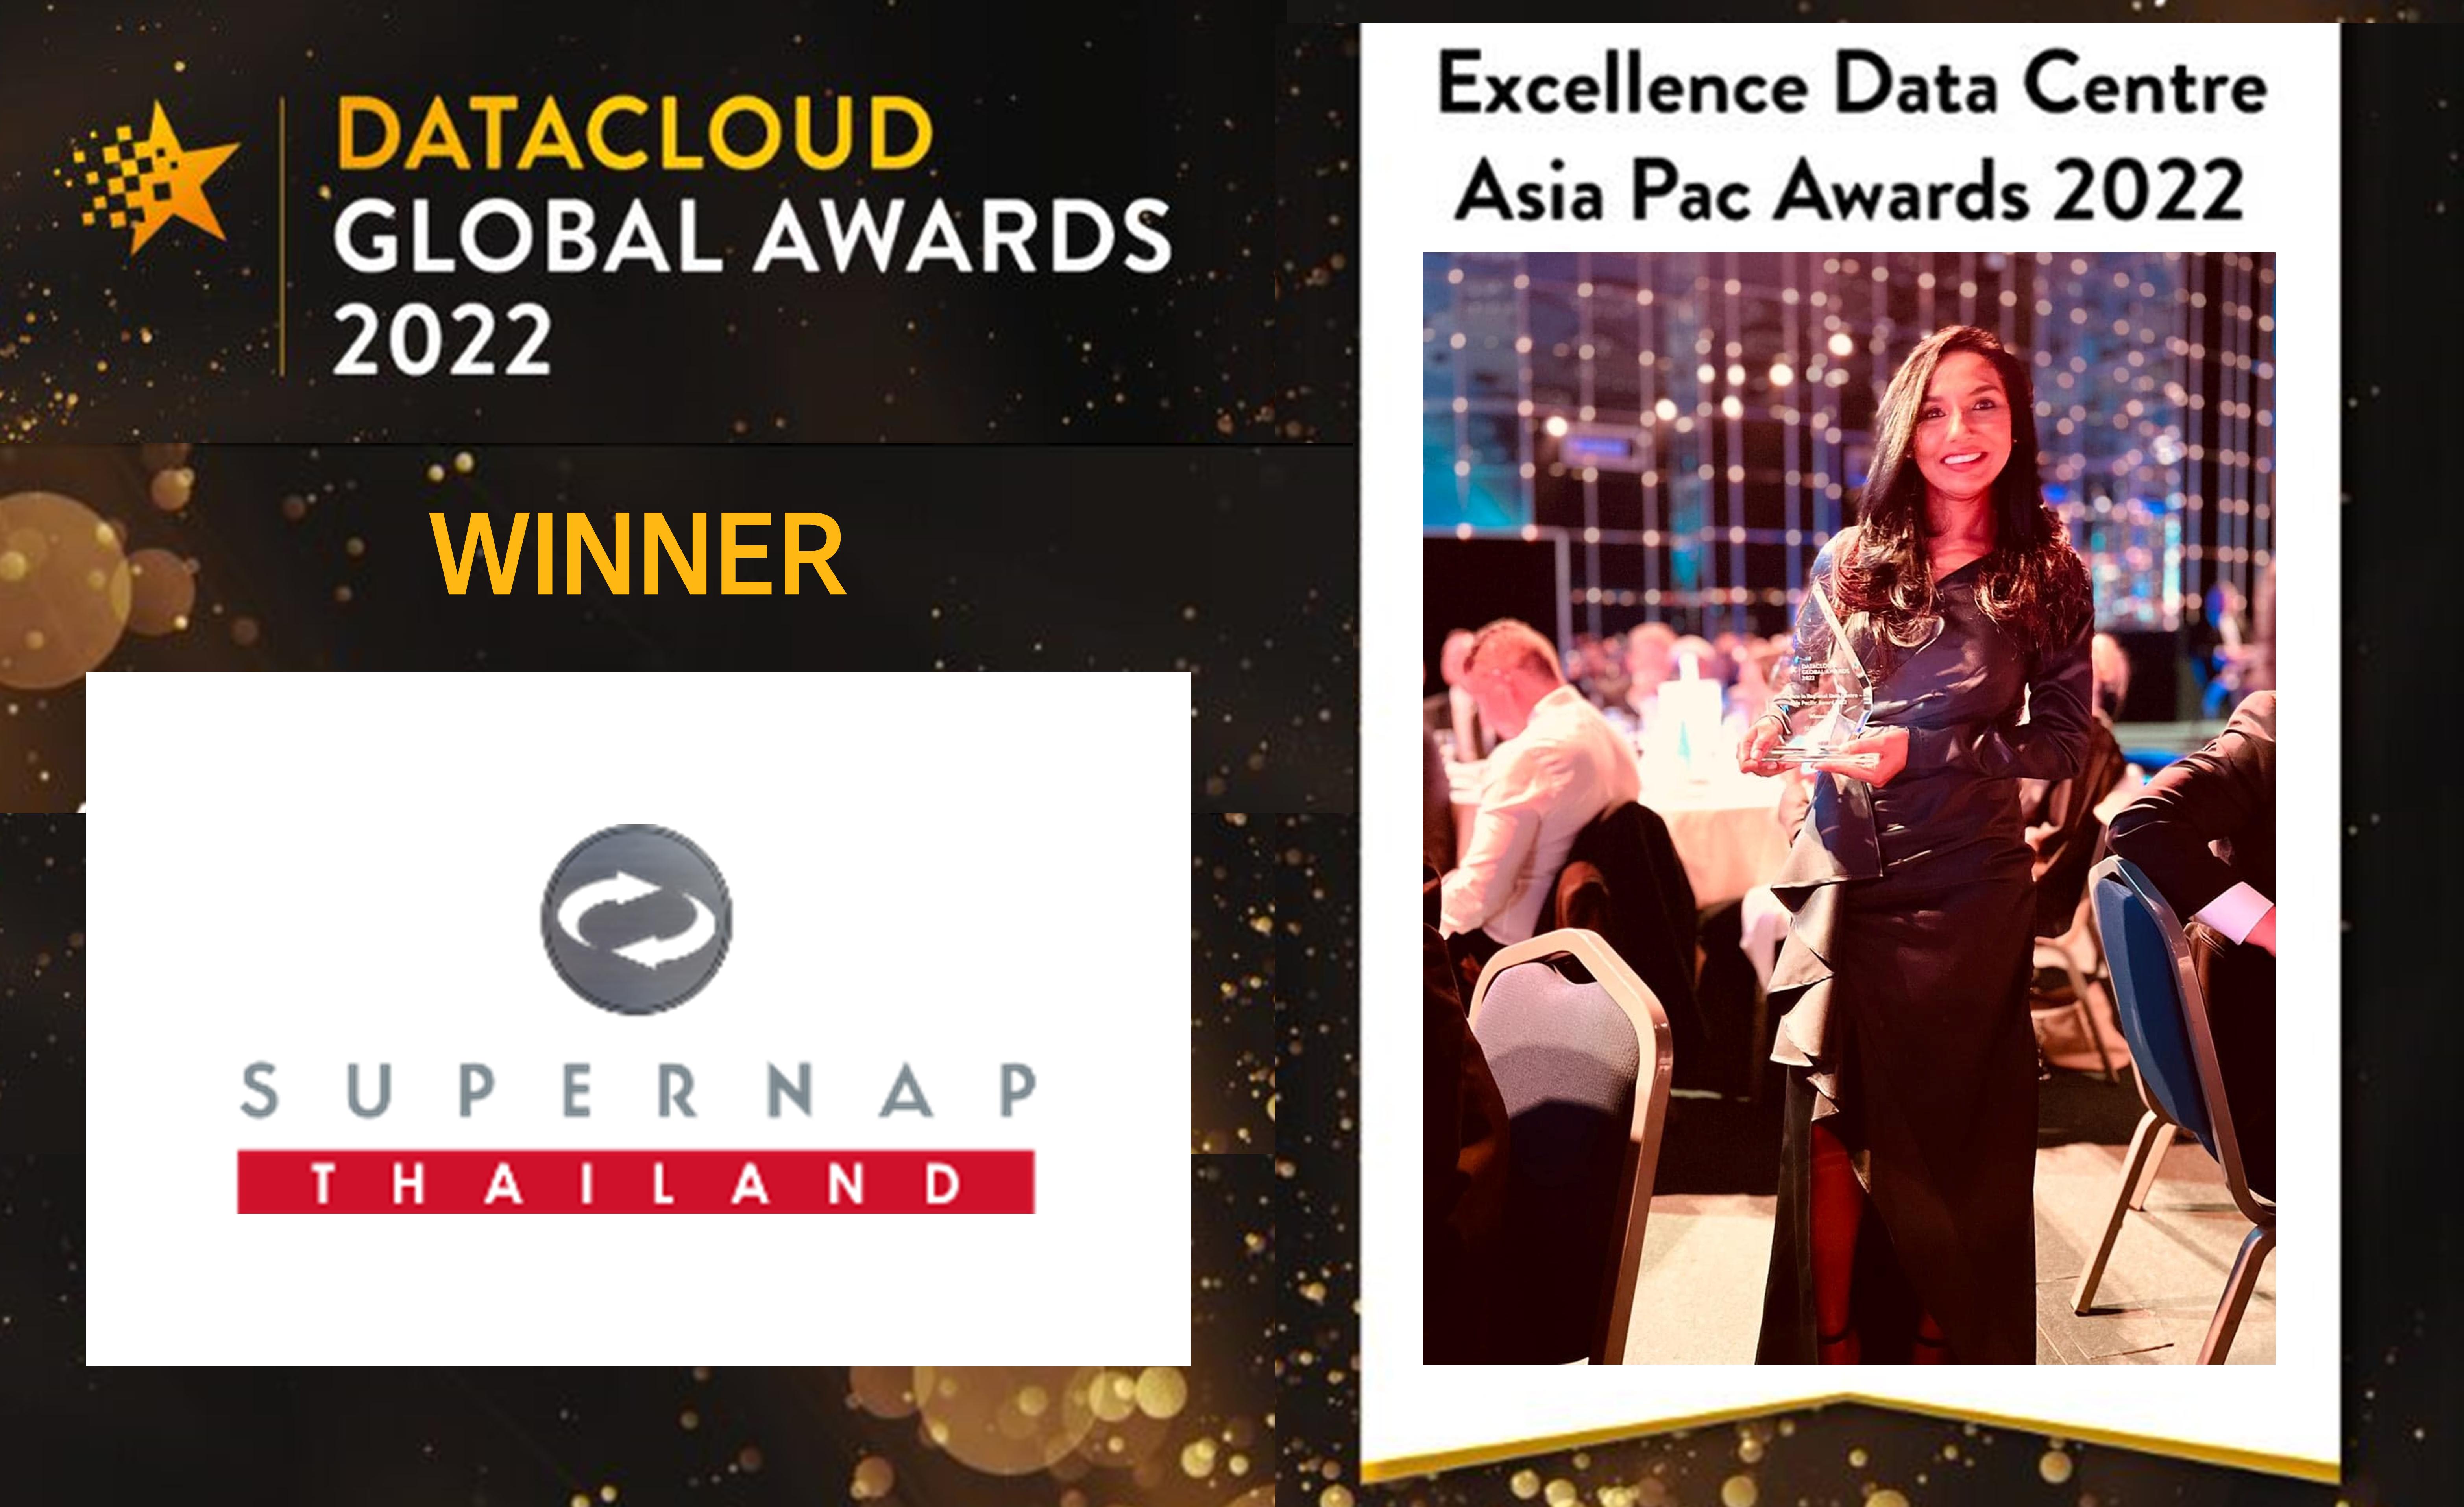 SUPERNAP (Thailand) wins the Excellence DataCloud Data Center Asia Pacific Award 2022 from BroadGroup